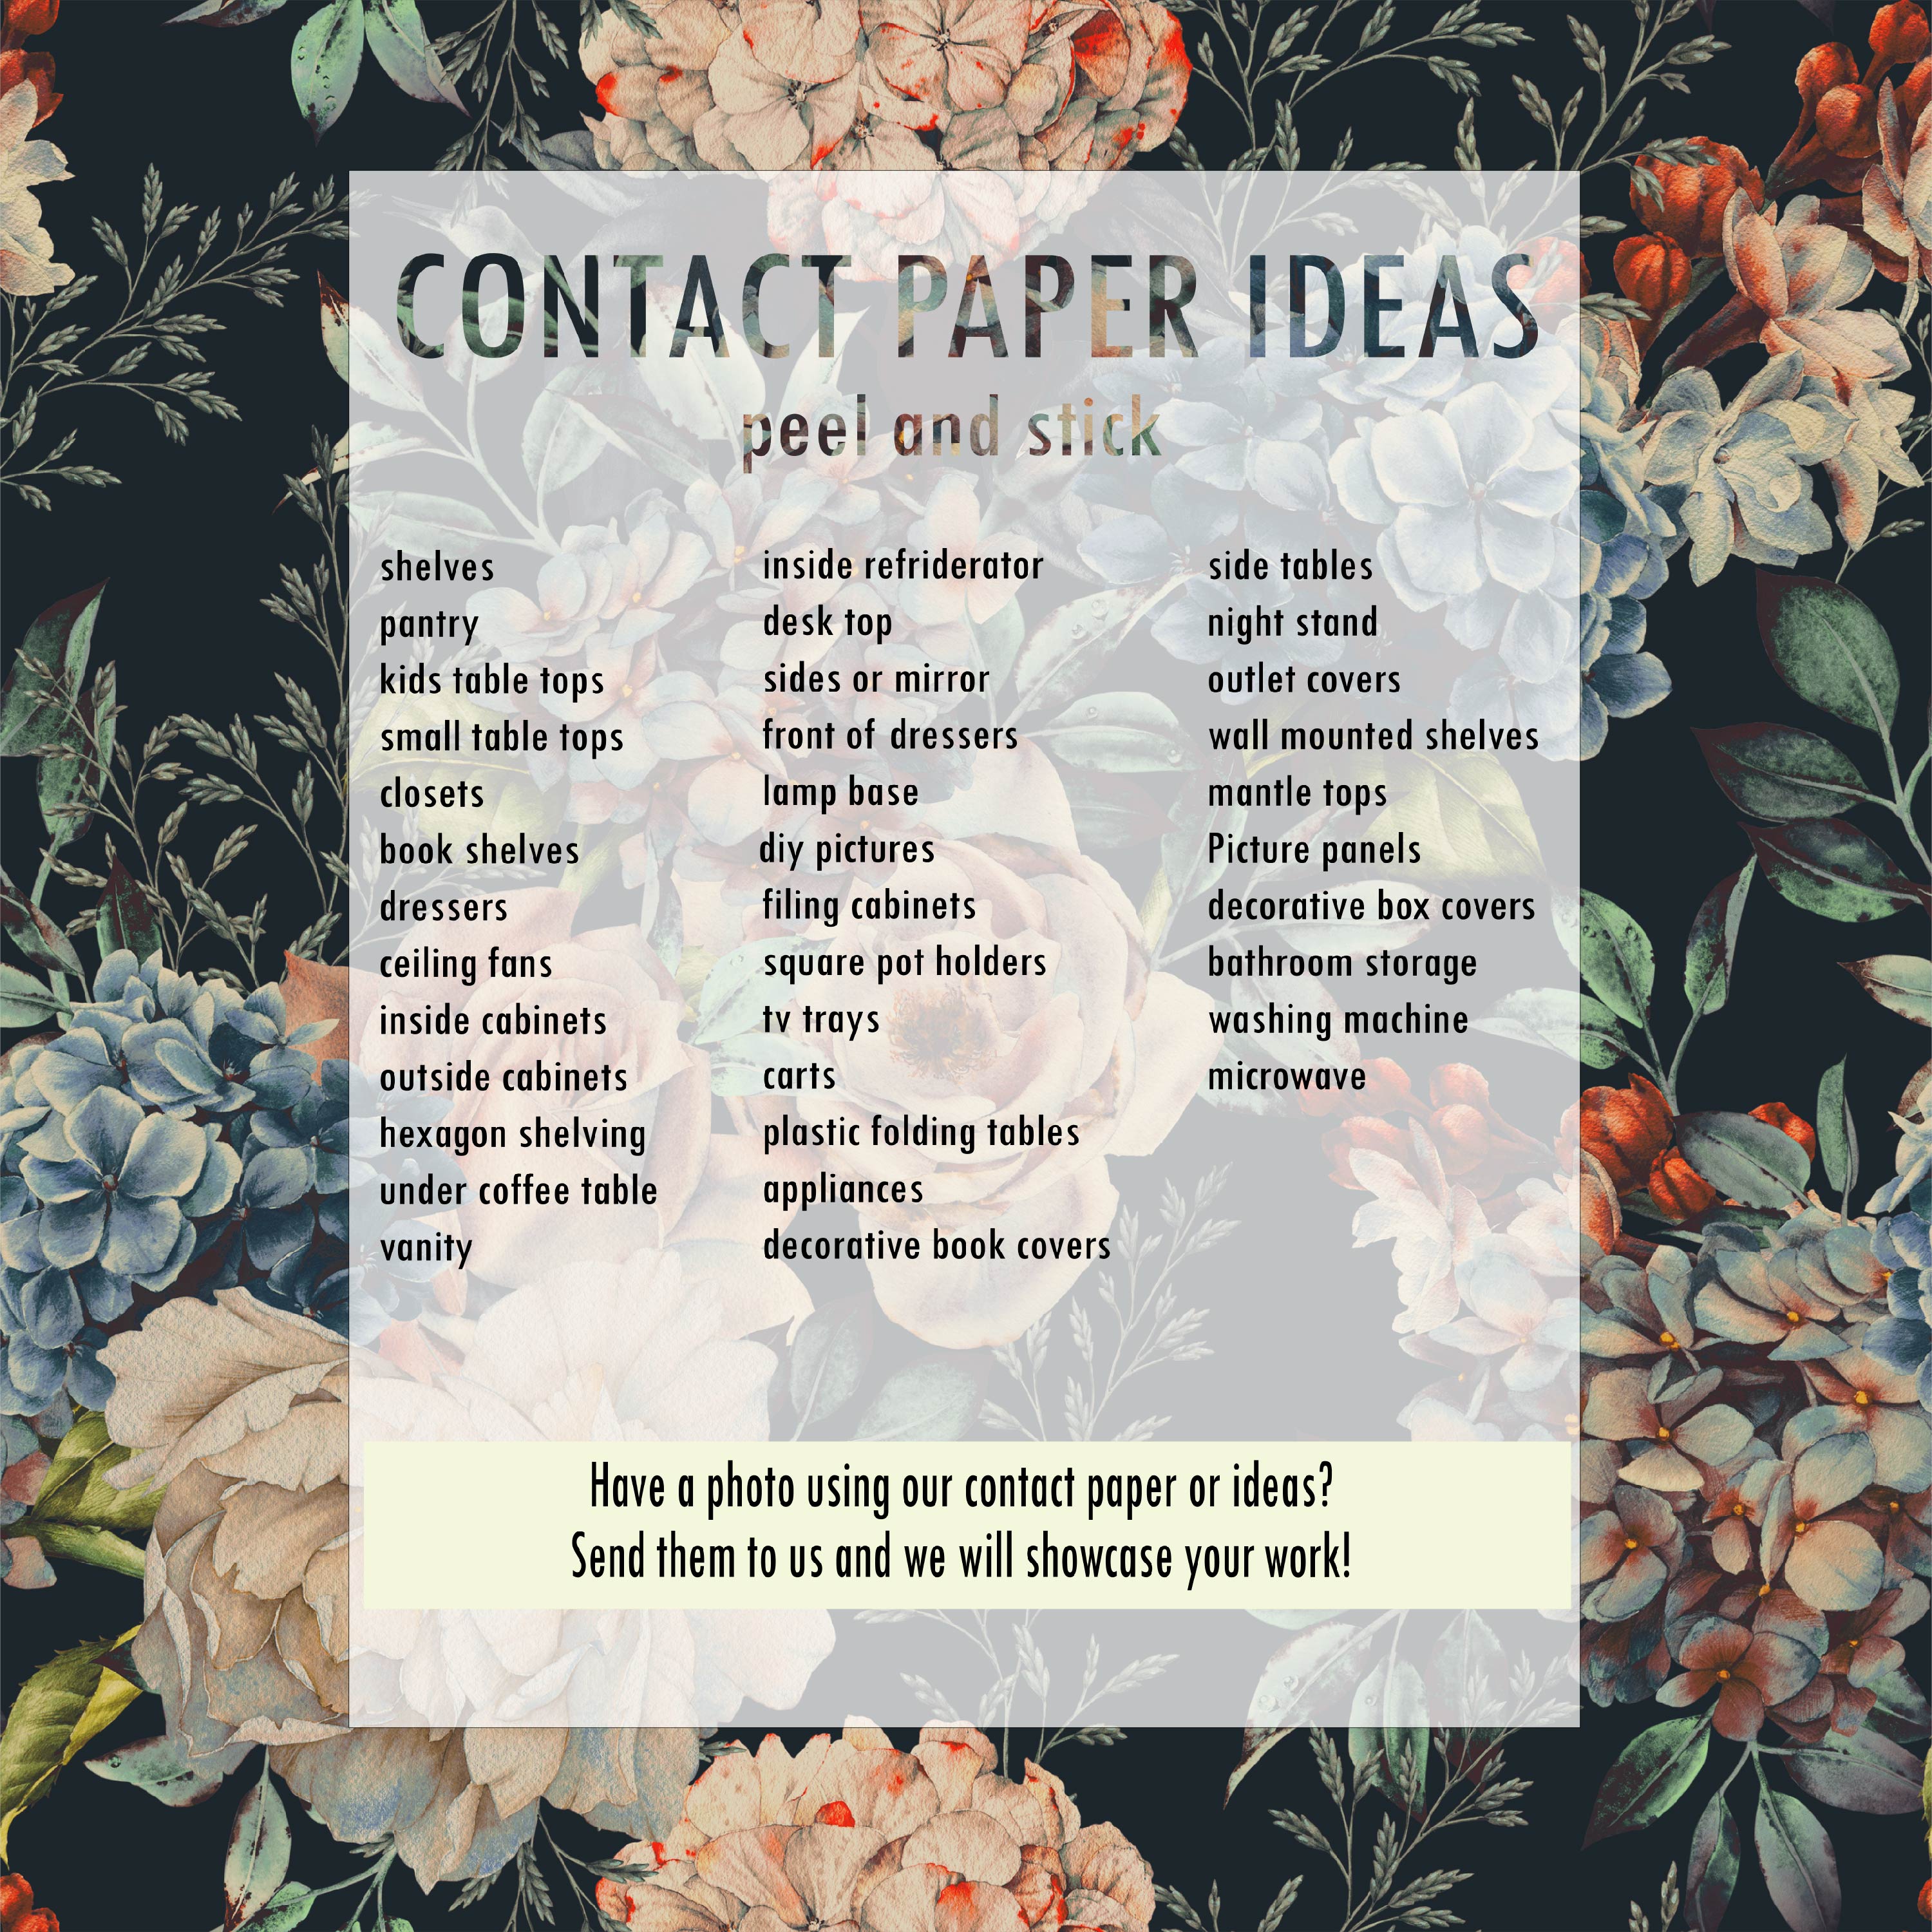 What kinds of things can I use contact paper on?